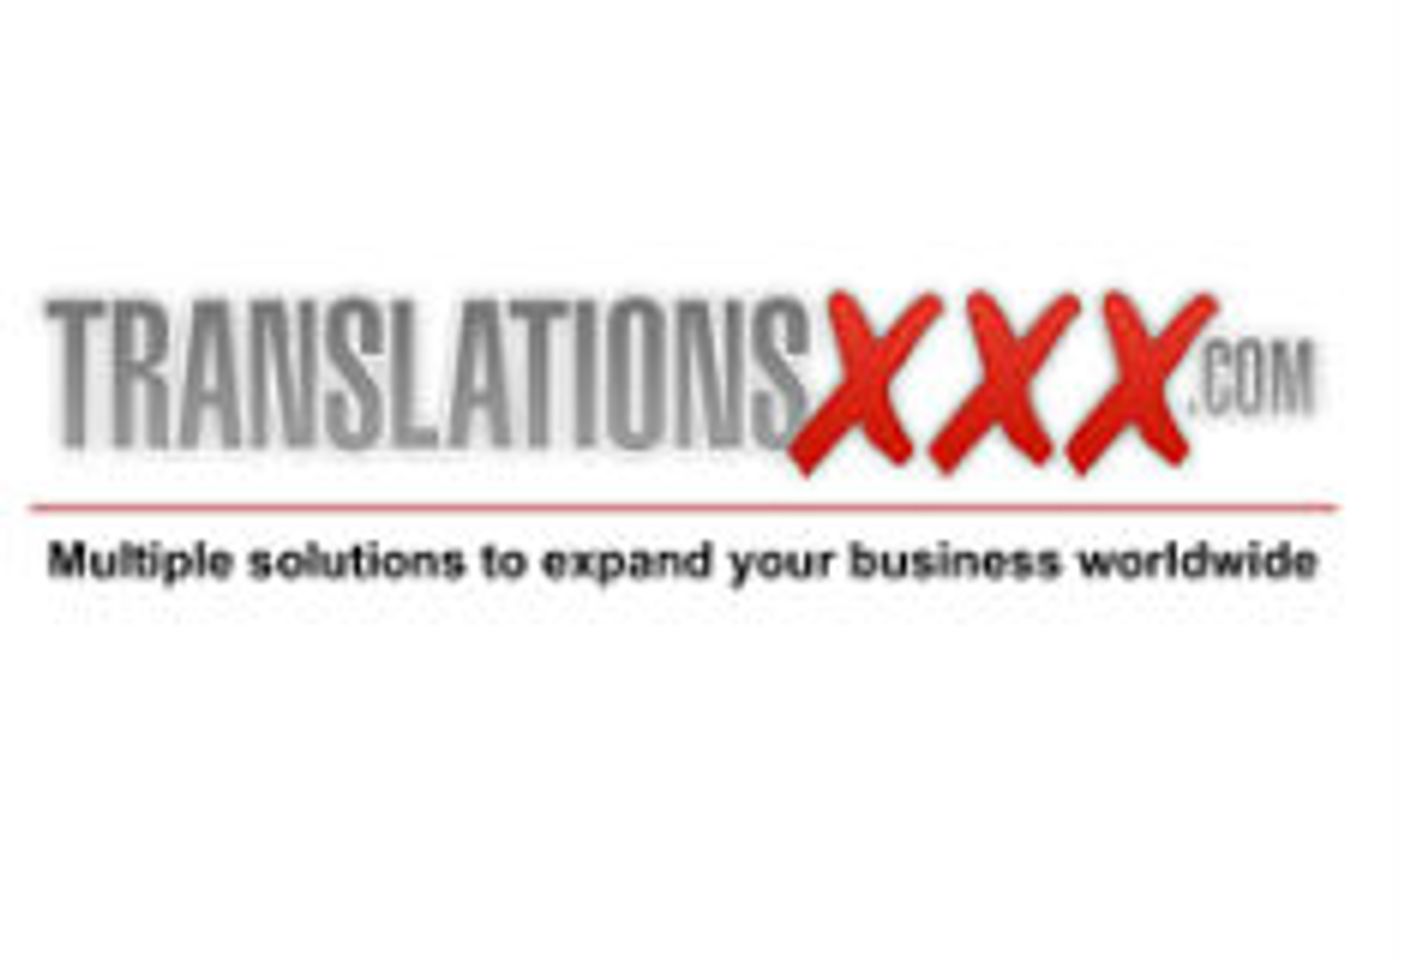 Translations XXX Launches German Language Services and Site